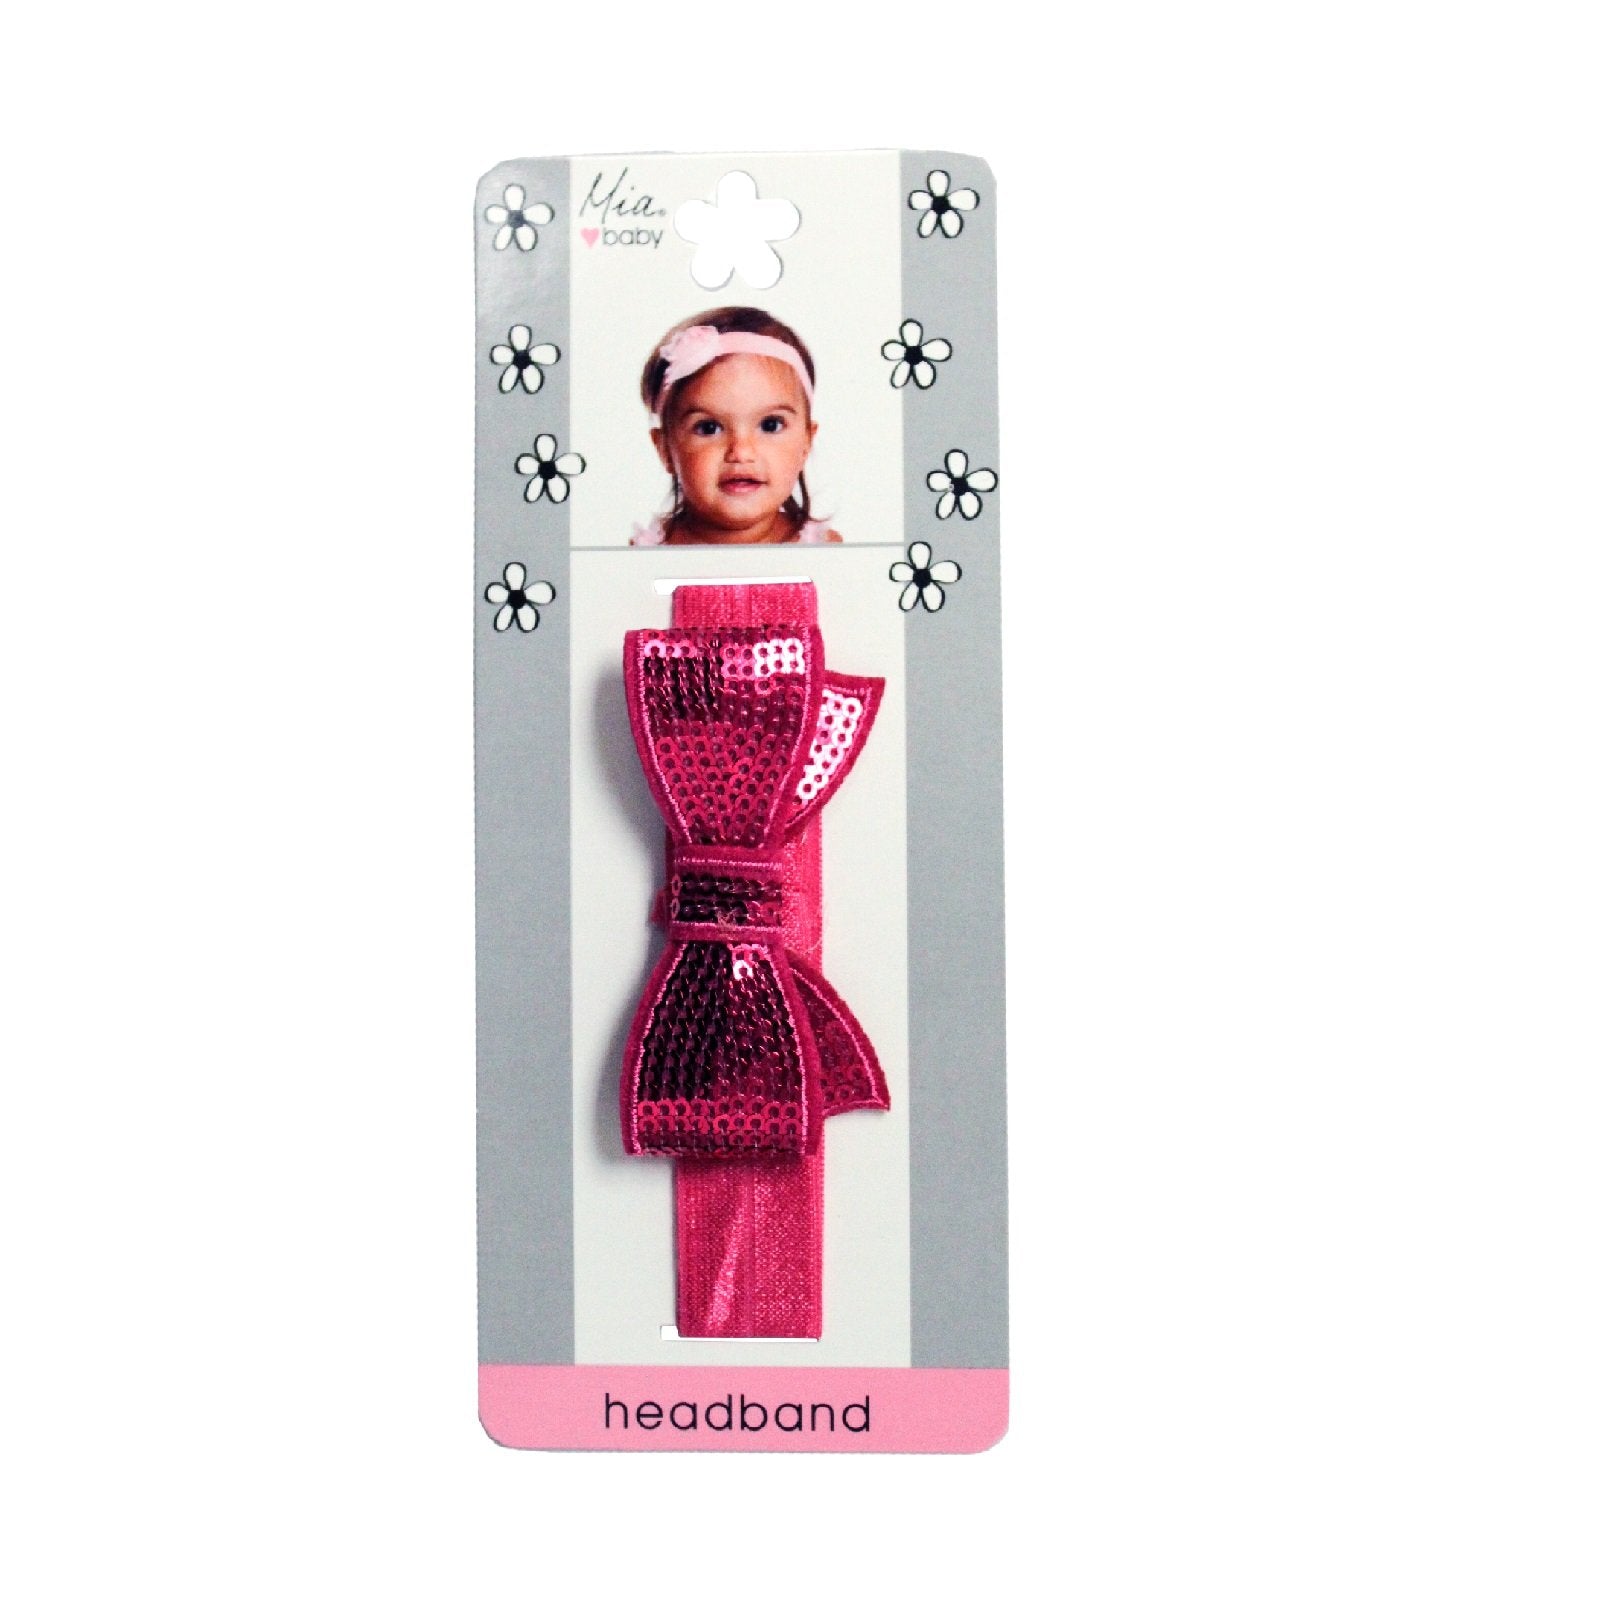 Mia® Baby Sequins Bow Headband - hot pink color - shown on packaging - invented by #MiaKaminski #MiaBeauty #Mia #Beauty #Baby #hair #hairaccessories #headbands #babyheadbands #hairaccessoriesforgirls #hairclips #hairbarrettes #love #life #girl #woman